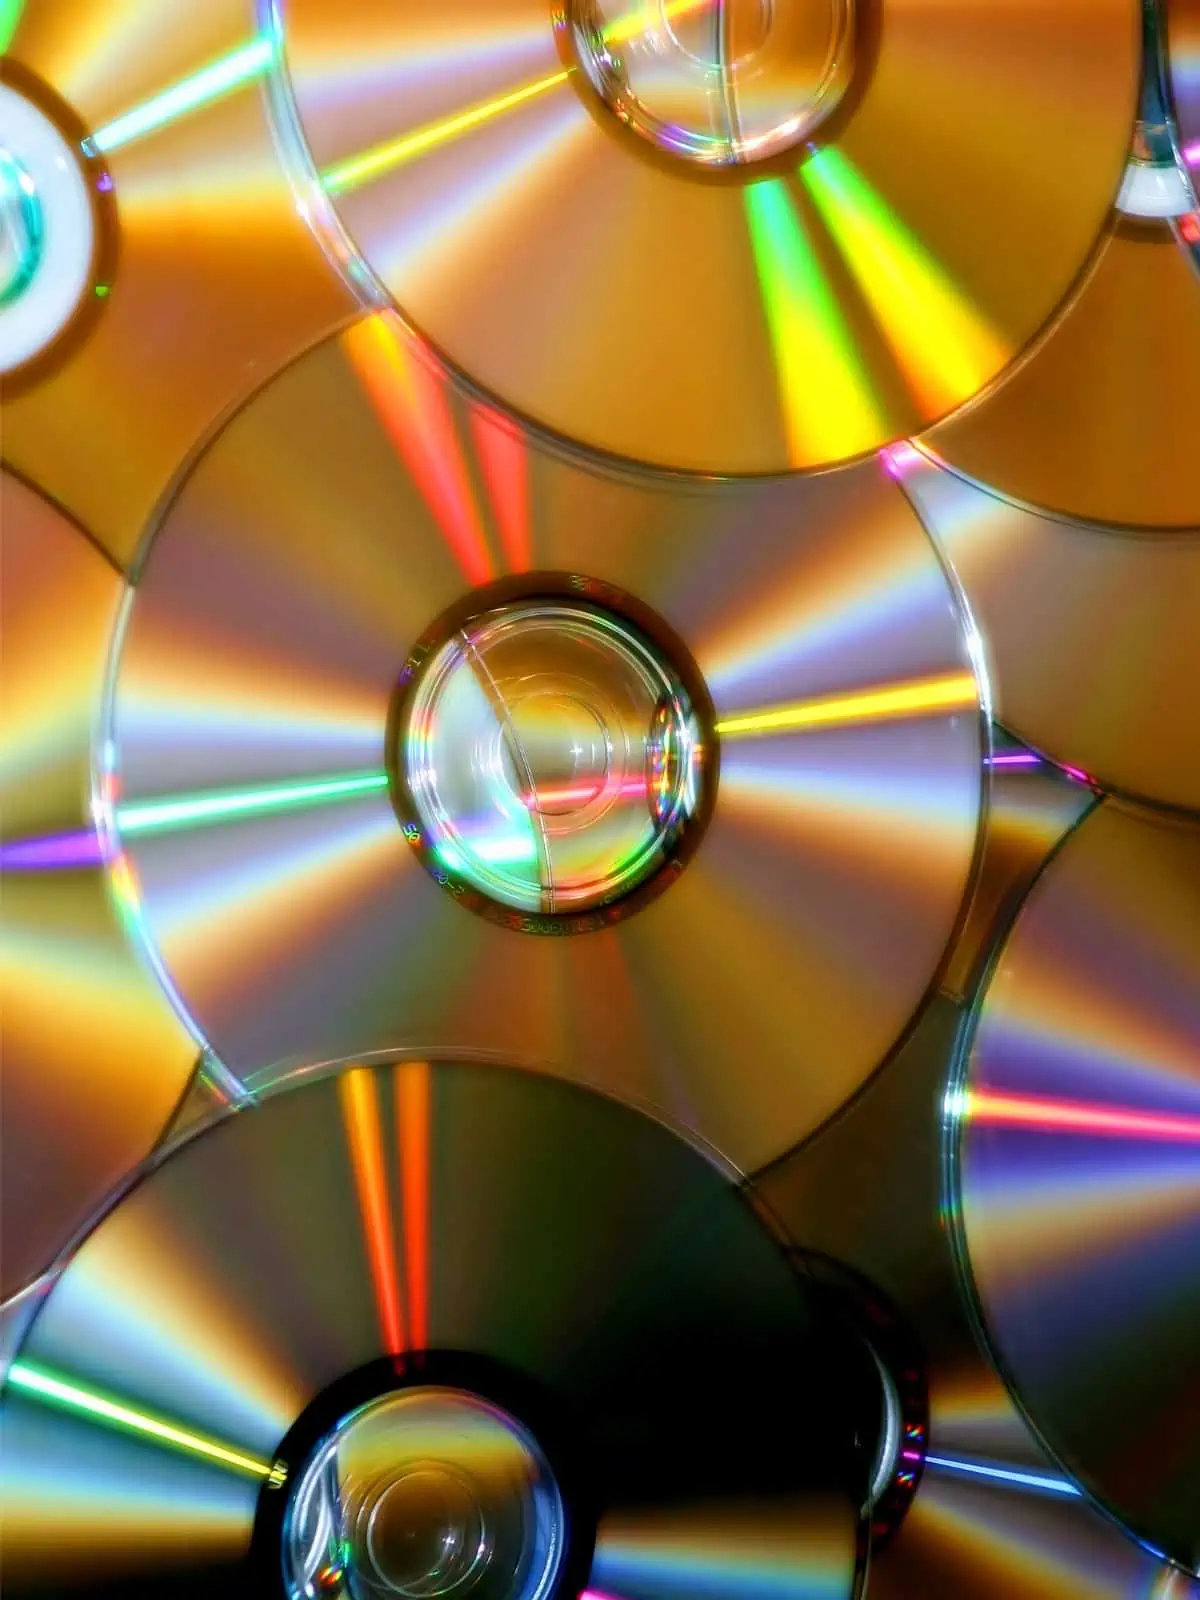 is it worth selling old cds?